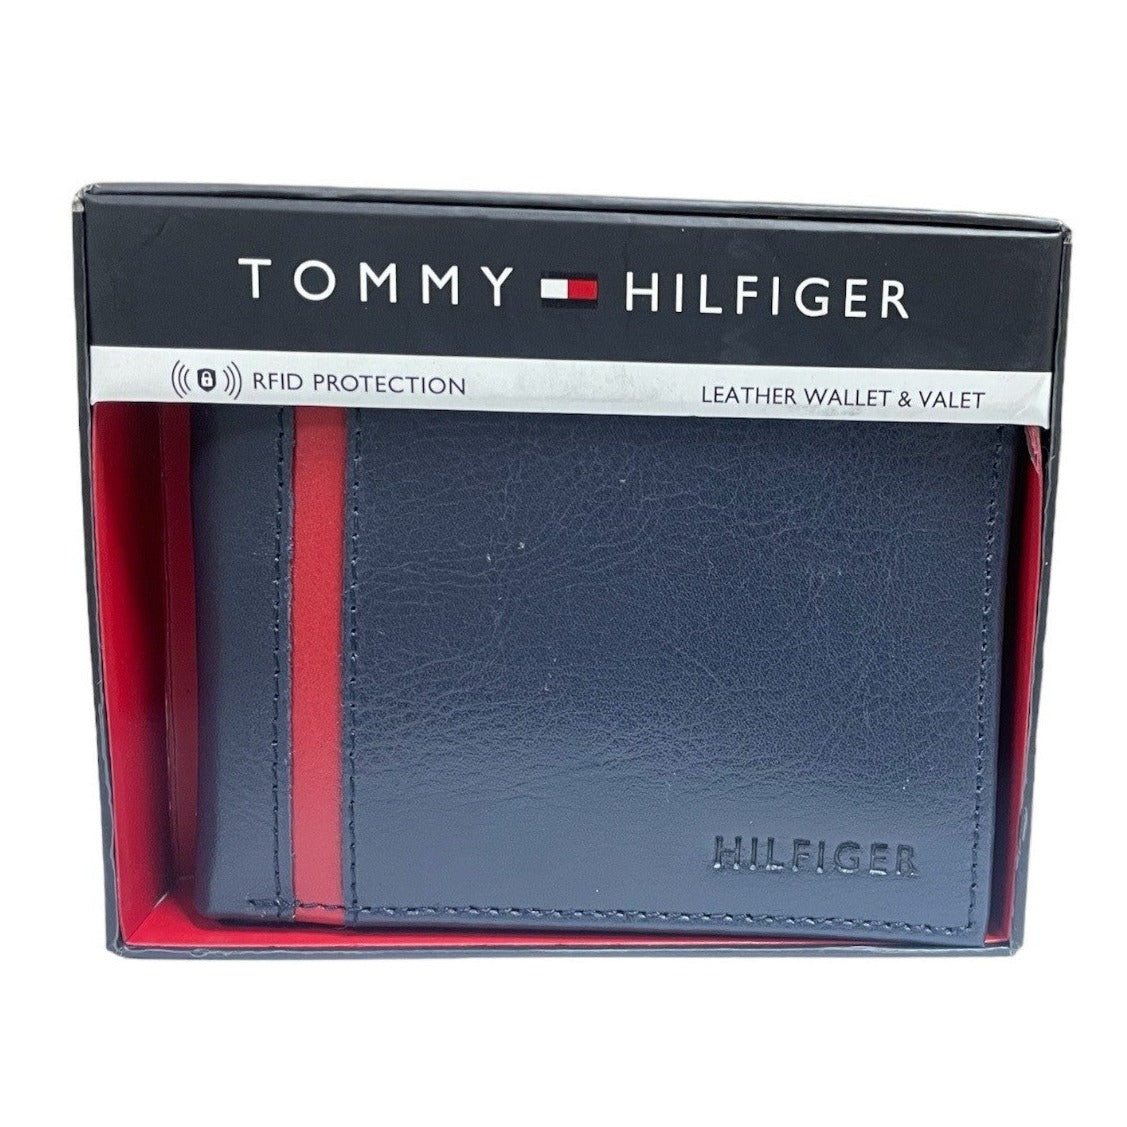 Tommy Hilfiger Men's Passcase Bifold Leather Wallet & Valet, Navy Red, RFID Protection holiday gift for men